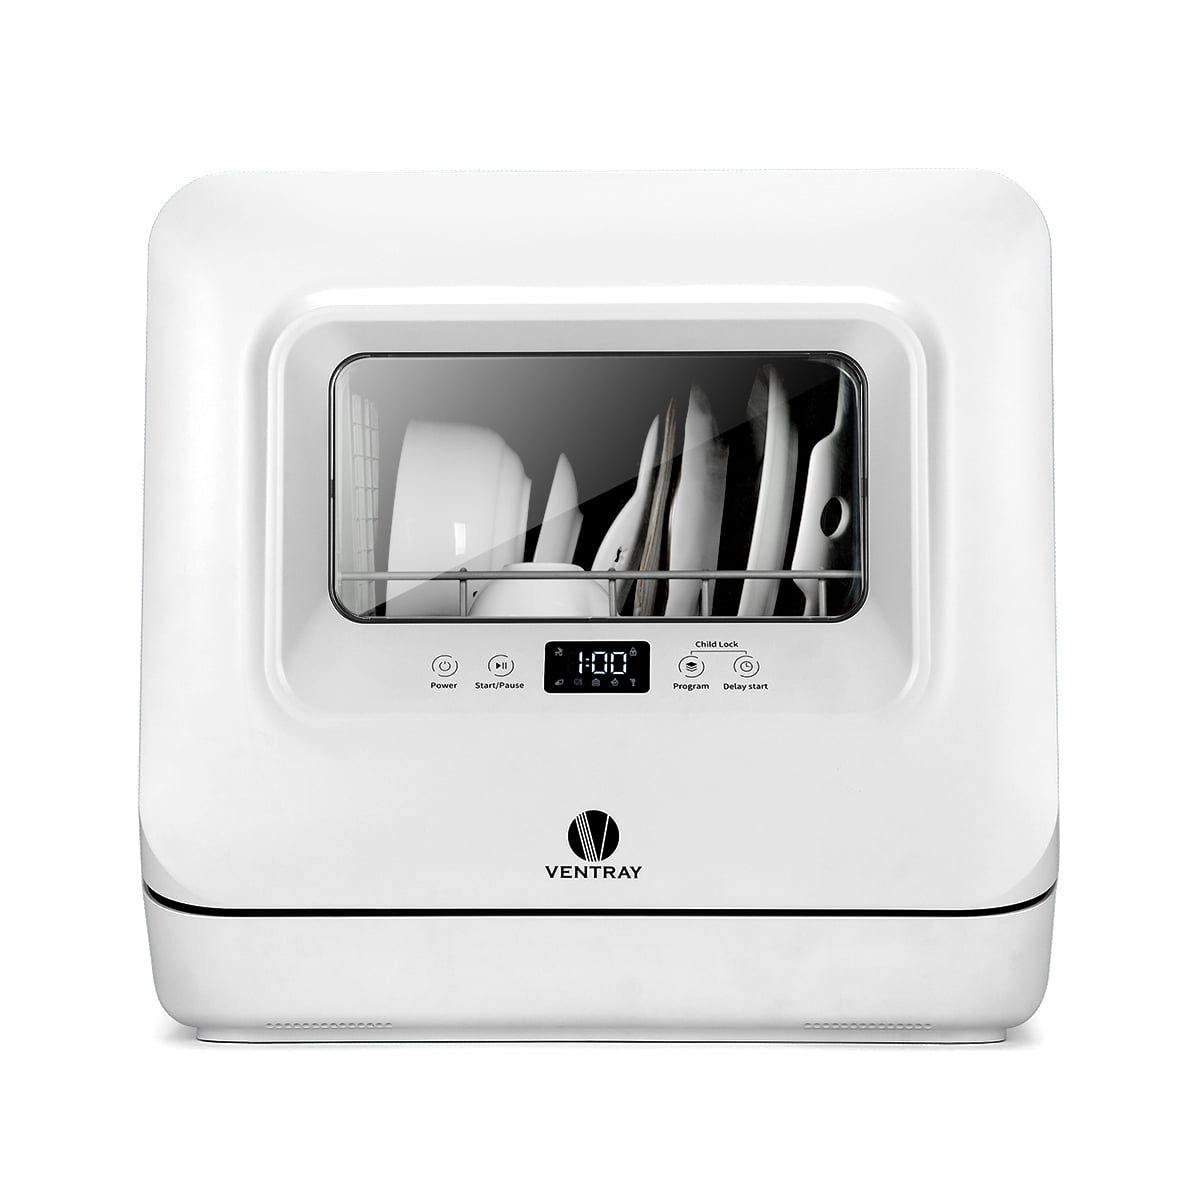 VENTRAY DW50 Portable Countertop Dishwashers，Compact Dishwasher